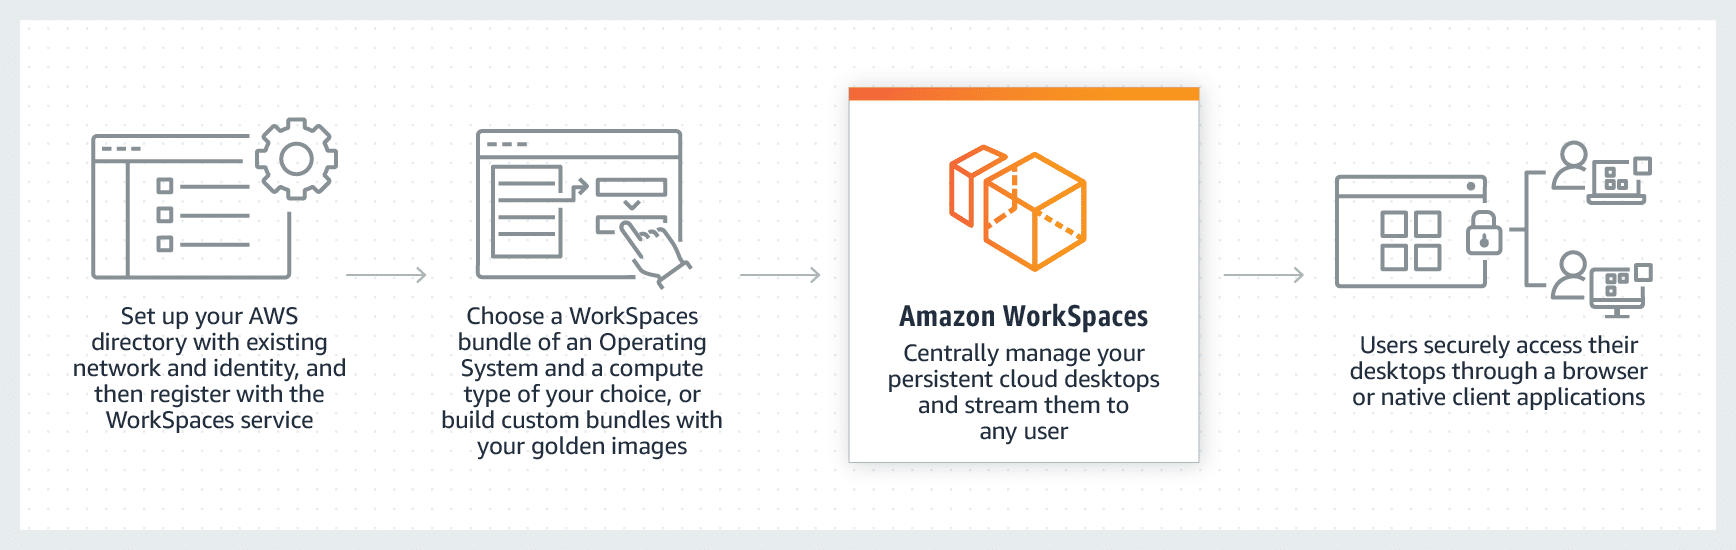 Remote Work Enablement with Amazon WorkSpaces